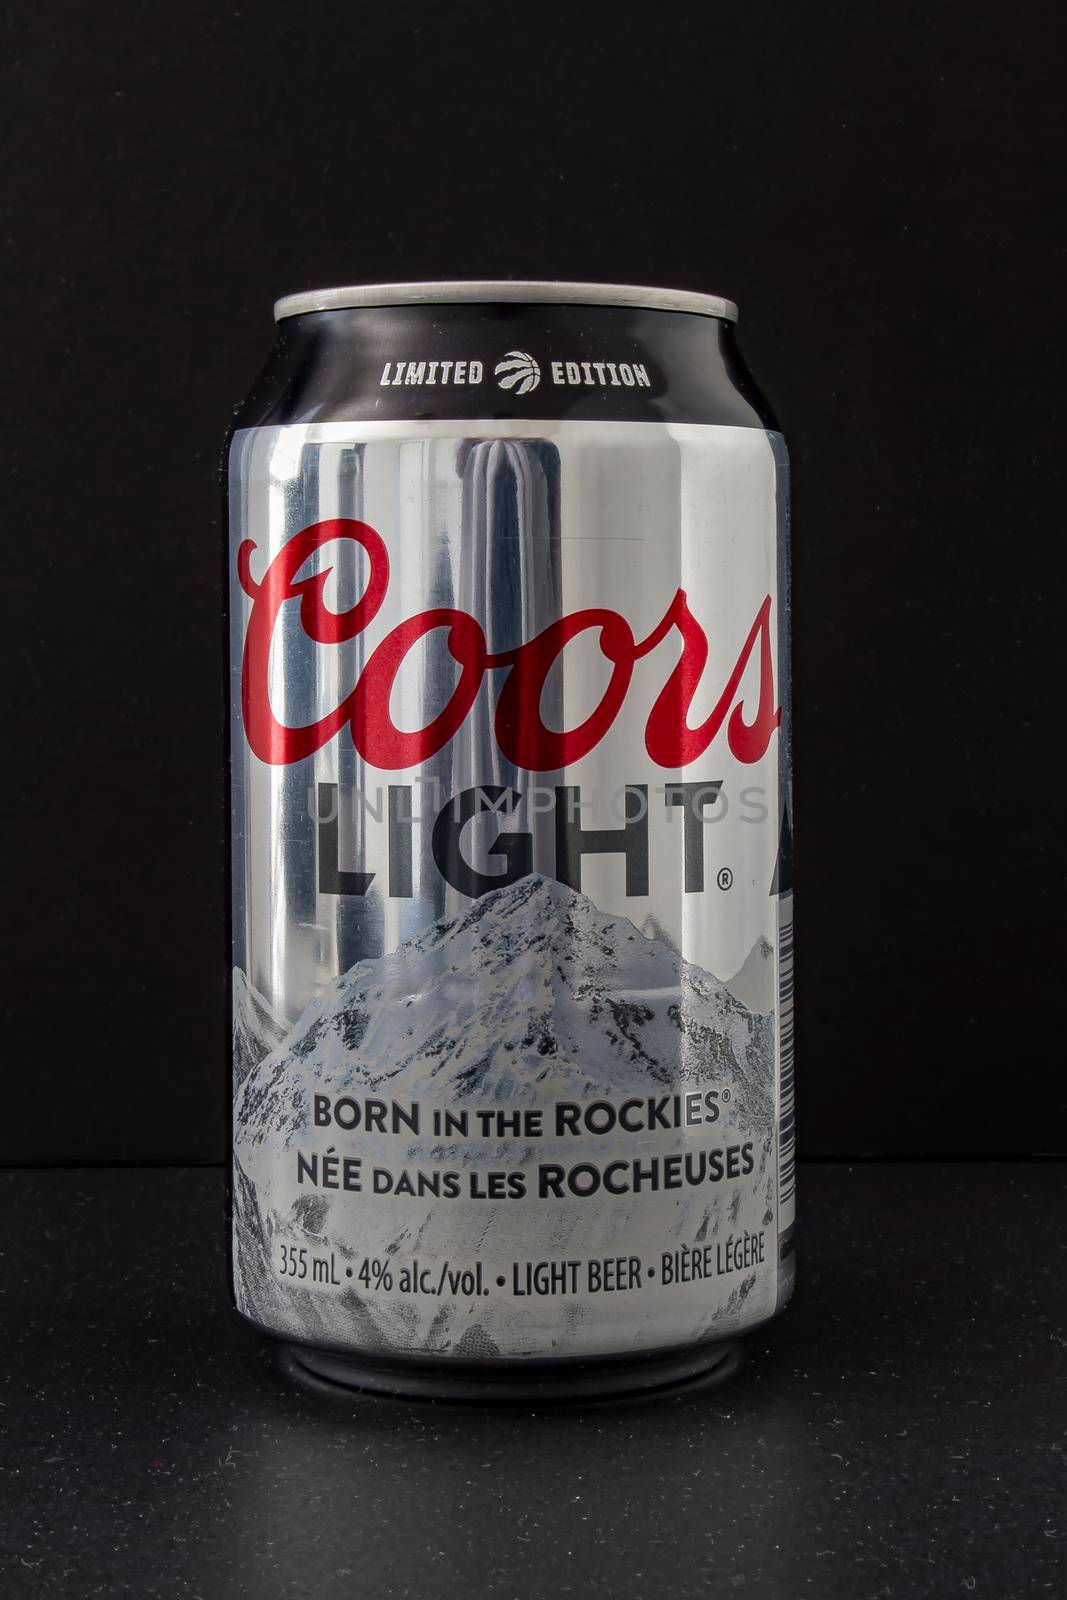 Calgary, Alberta, Canada. May 1, 2020. A beer can of Coors Light special edition silver can raptors, on a black background